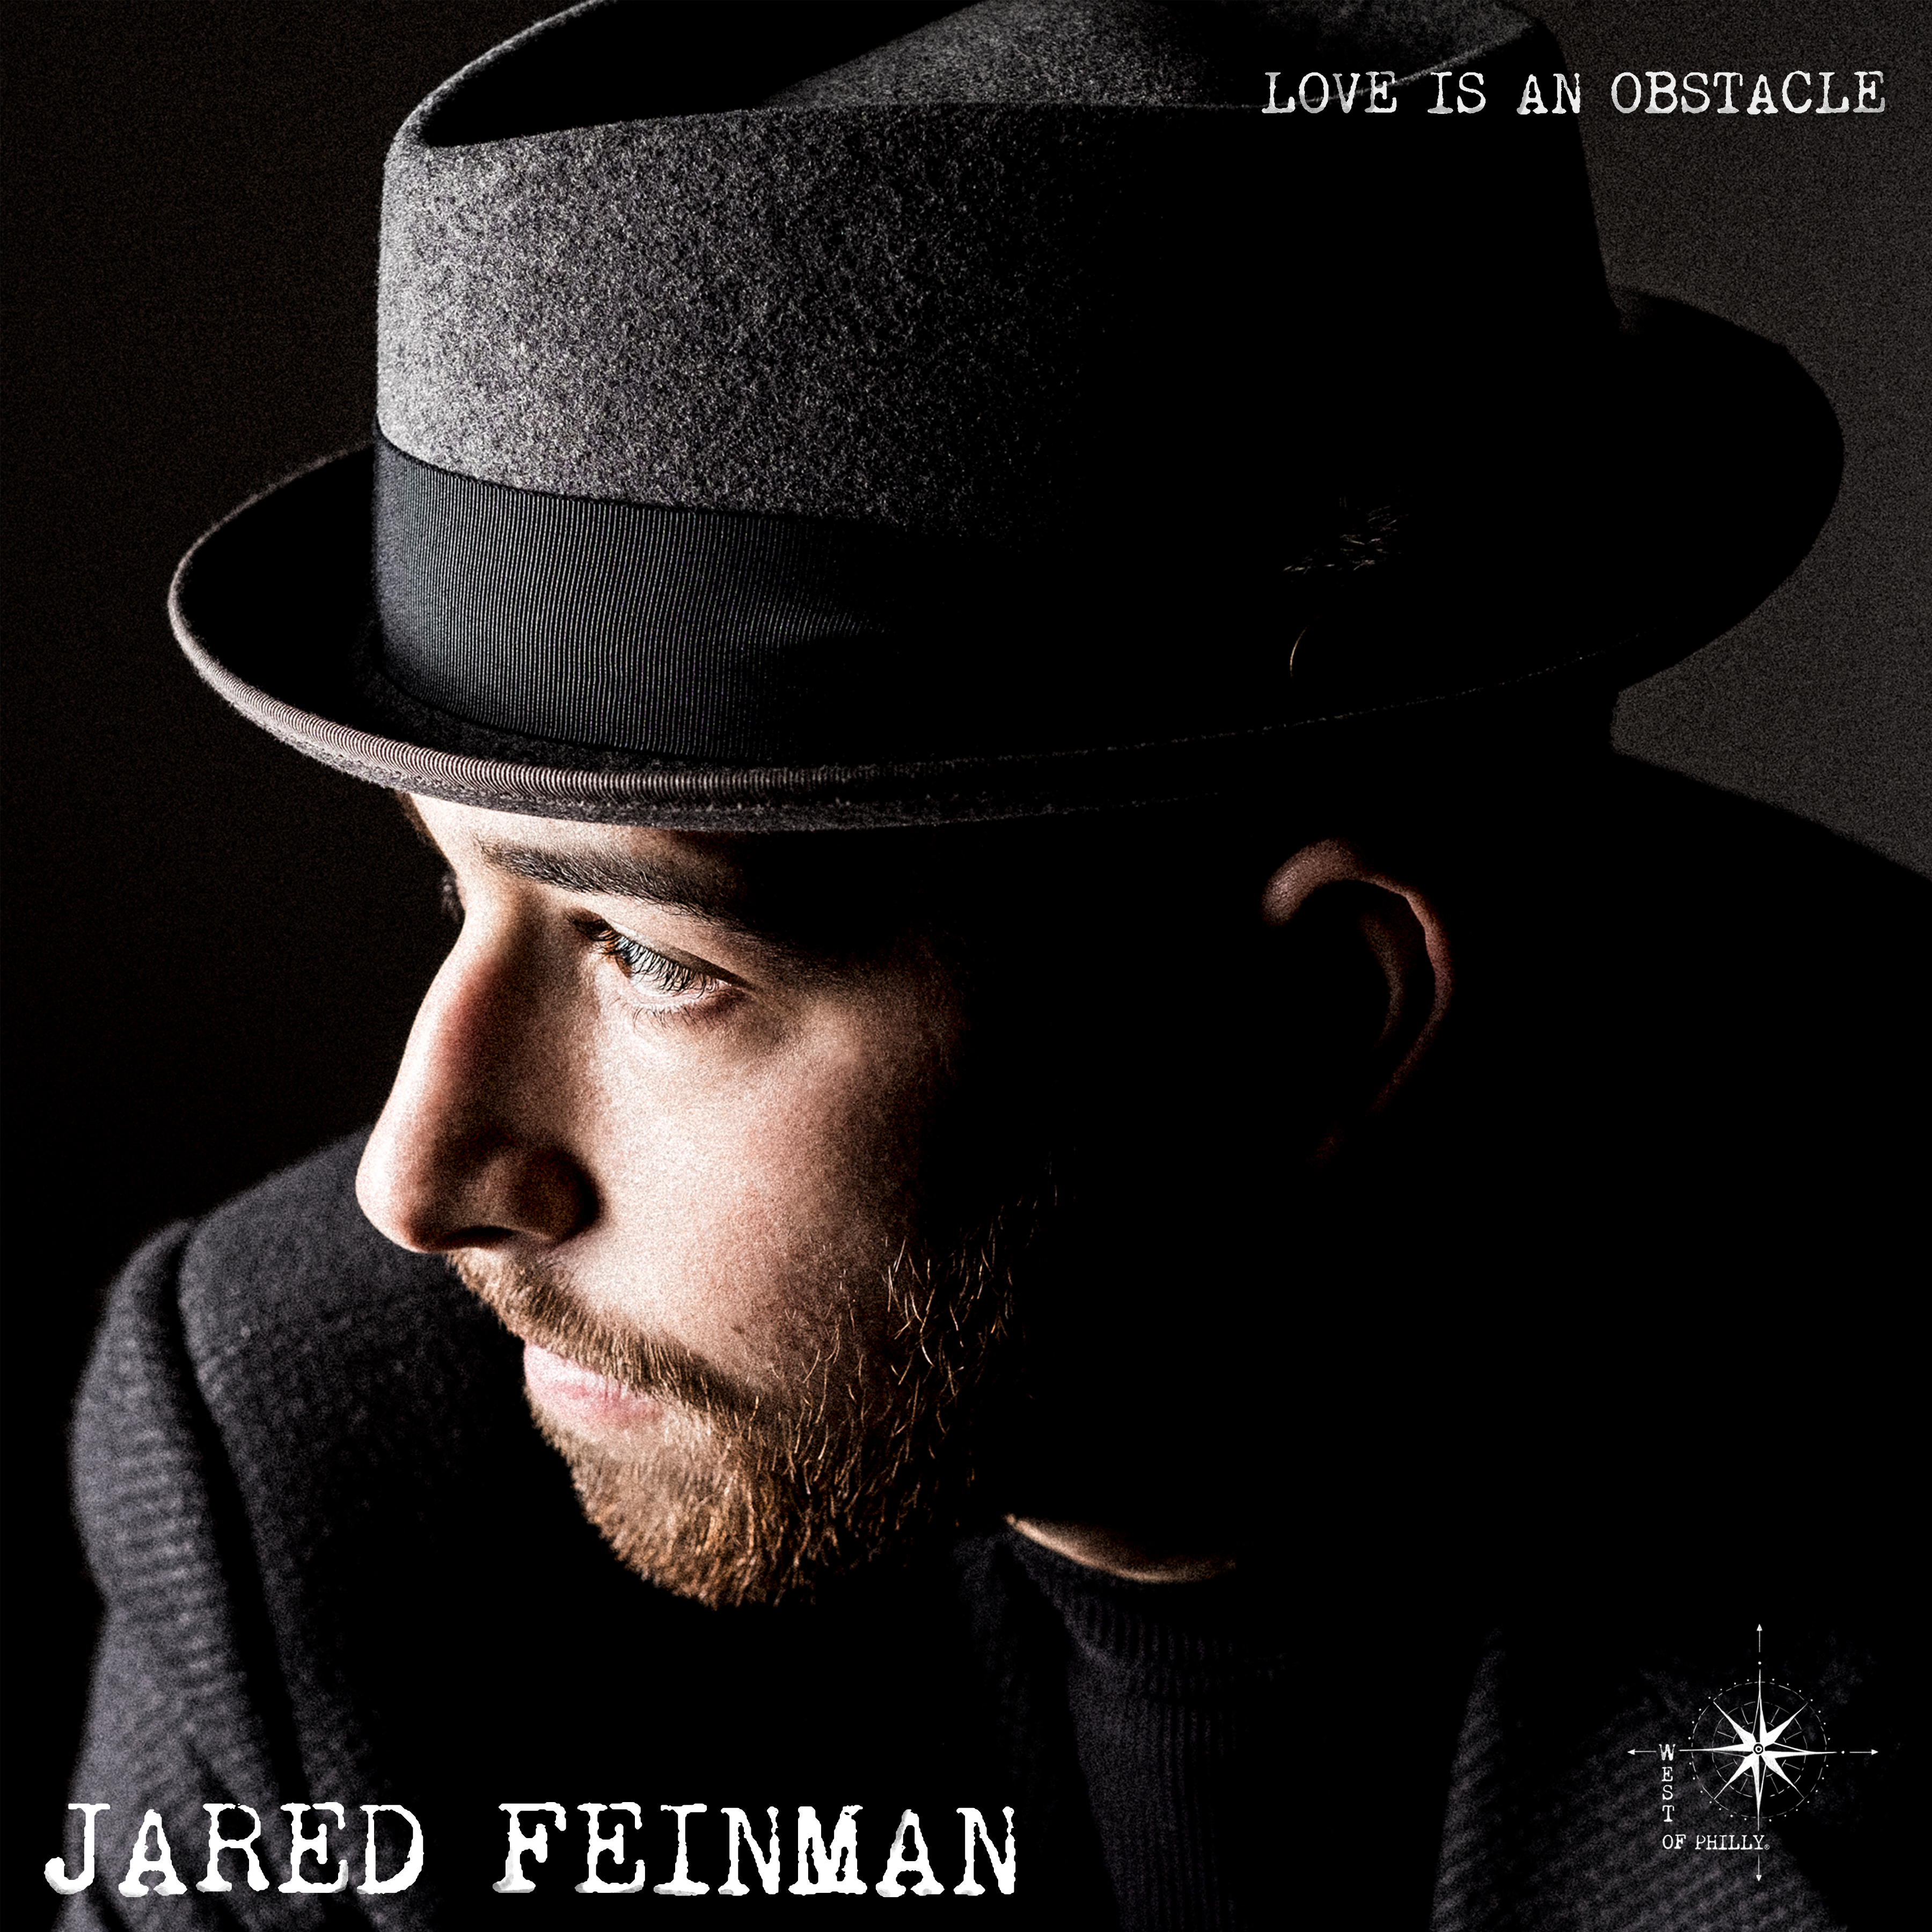 Jared Feinman | Official Site - PREORDER